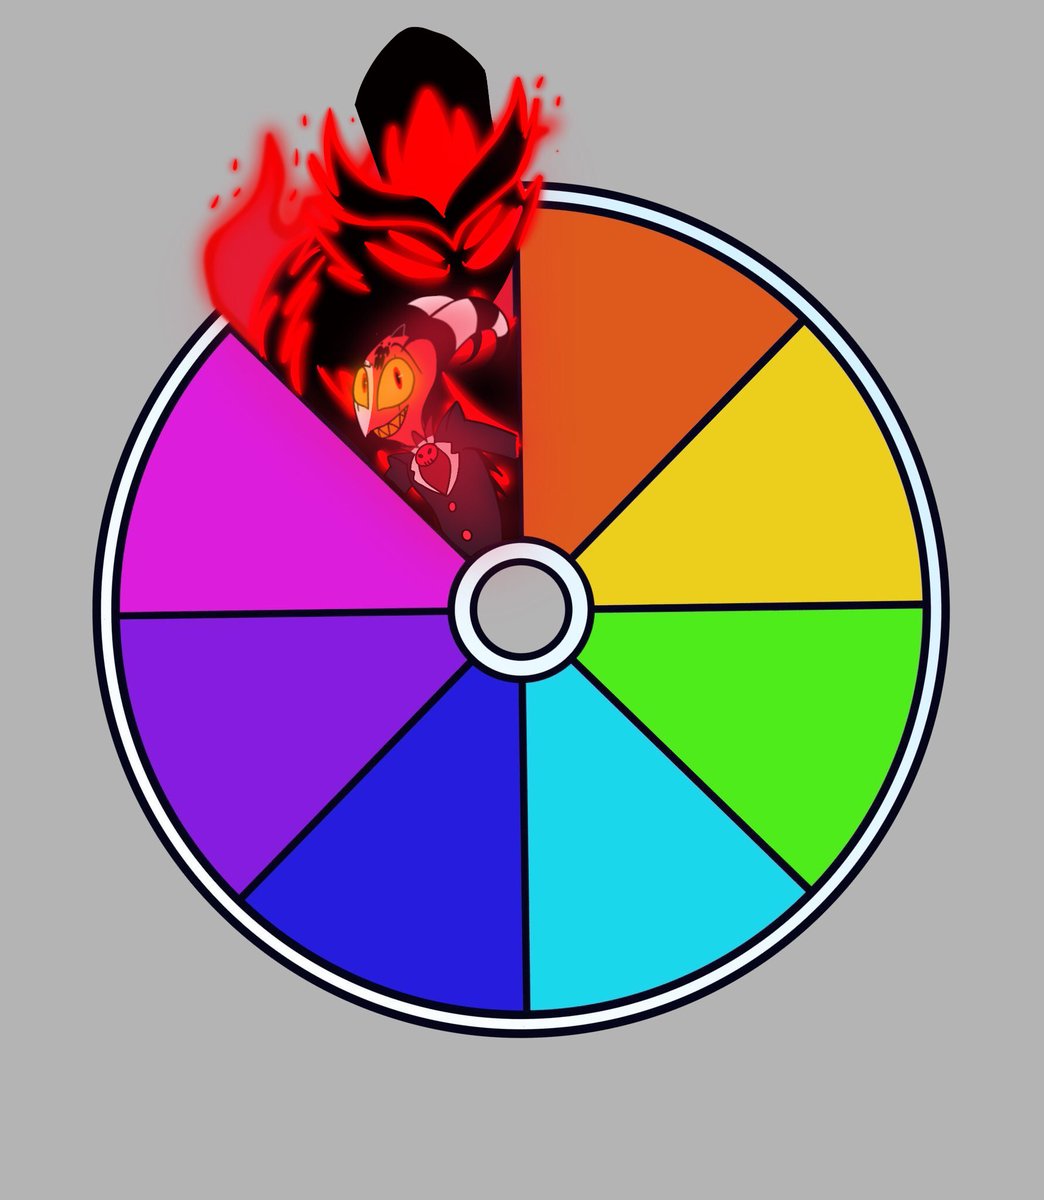 Added Blitzø and demon Stolas to the red section of the wheel!!! Next, comment below any orange animated characters for me to add to the orange part of the wheel!!!